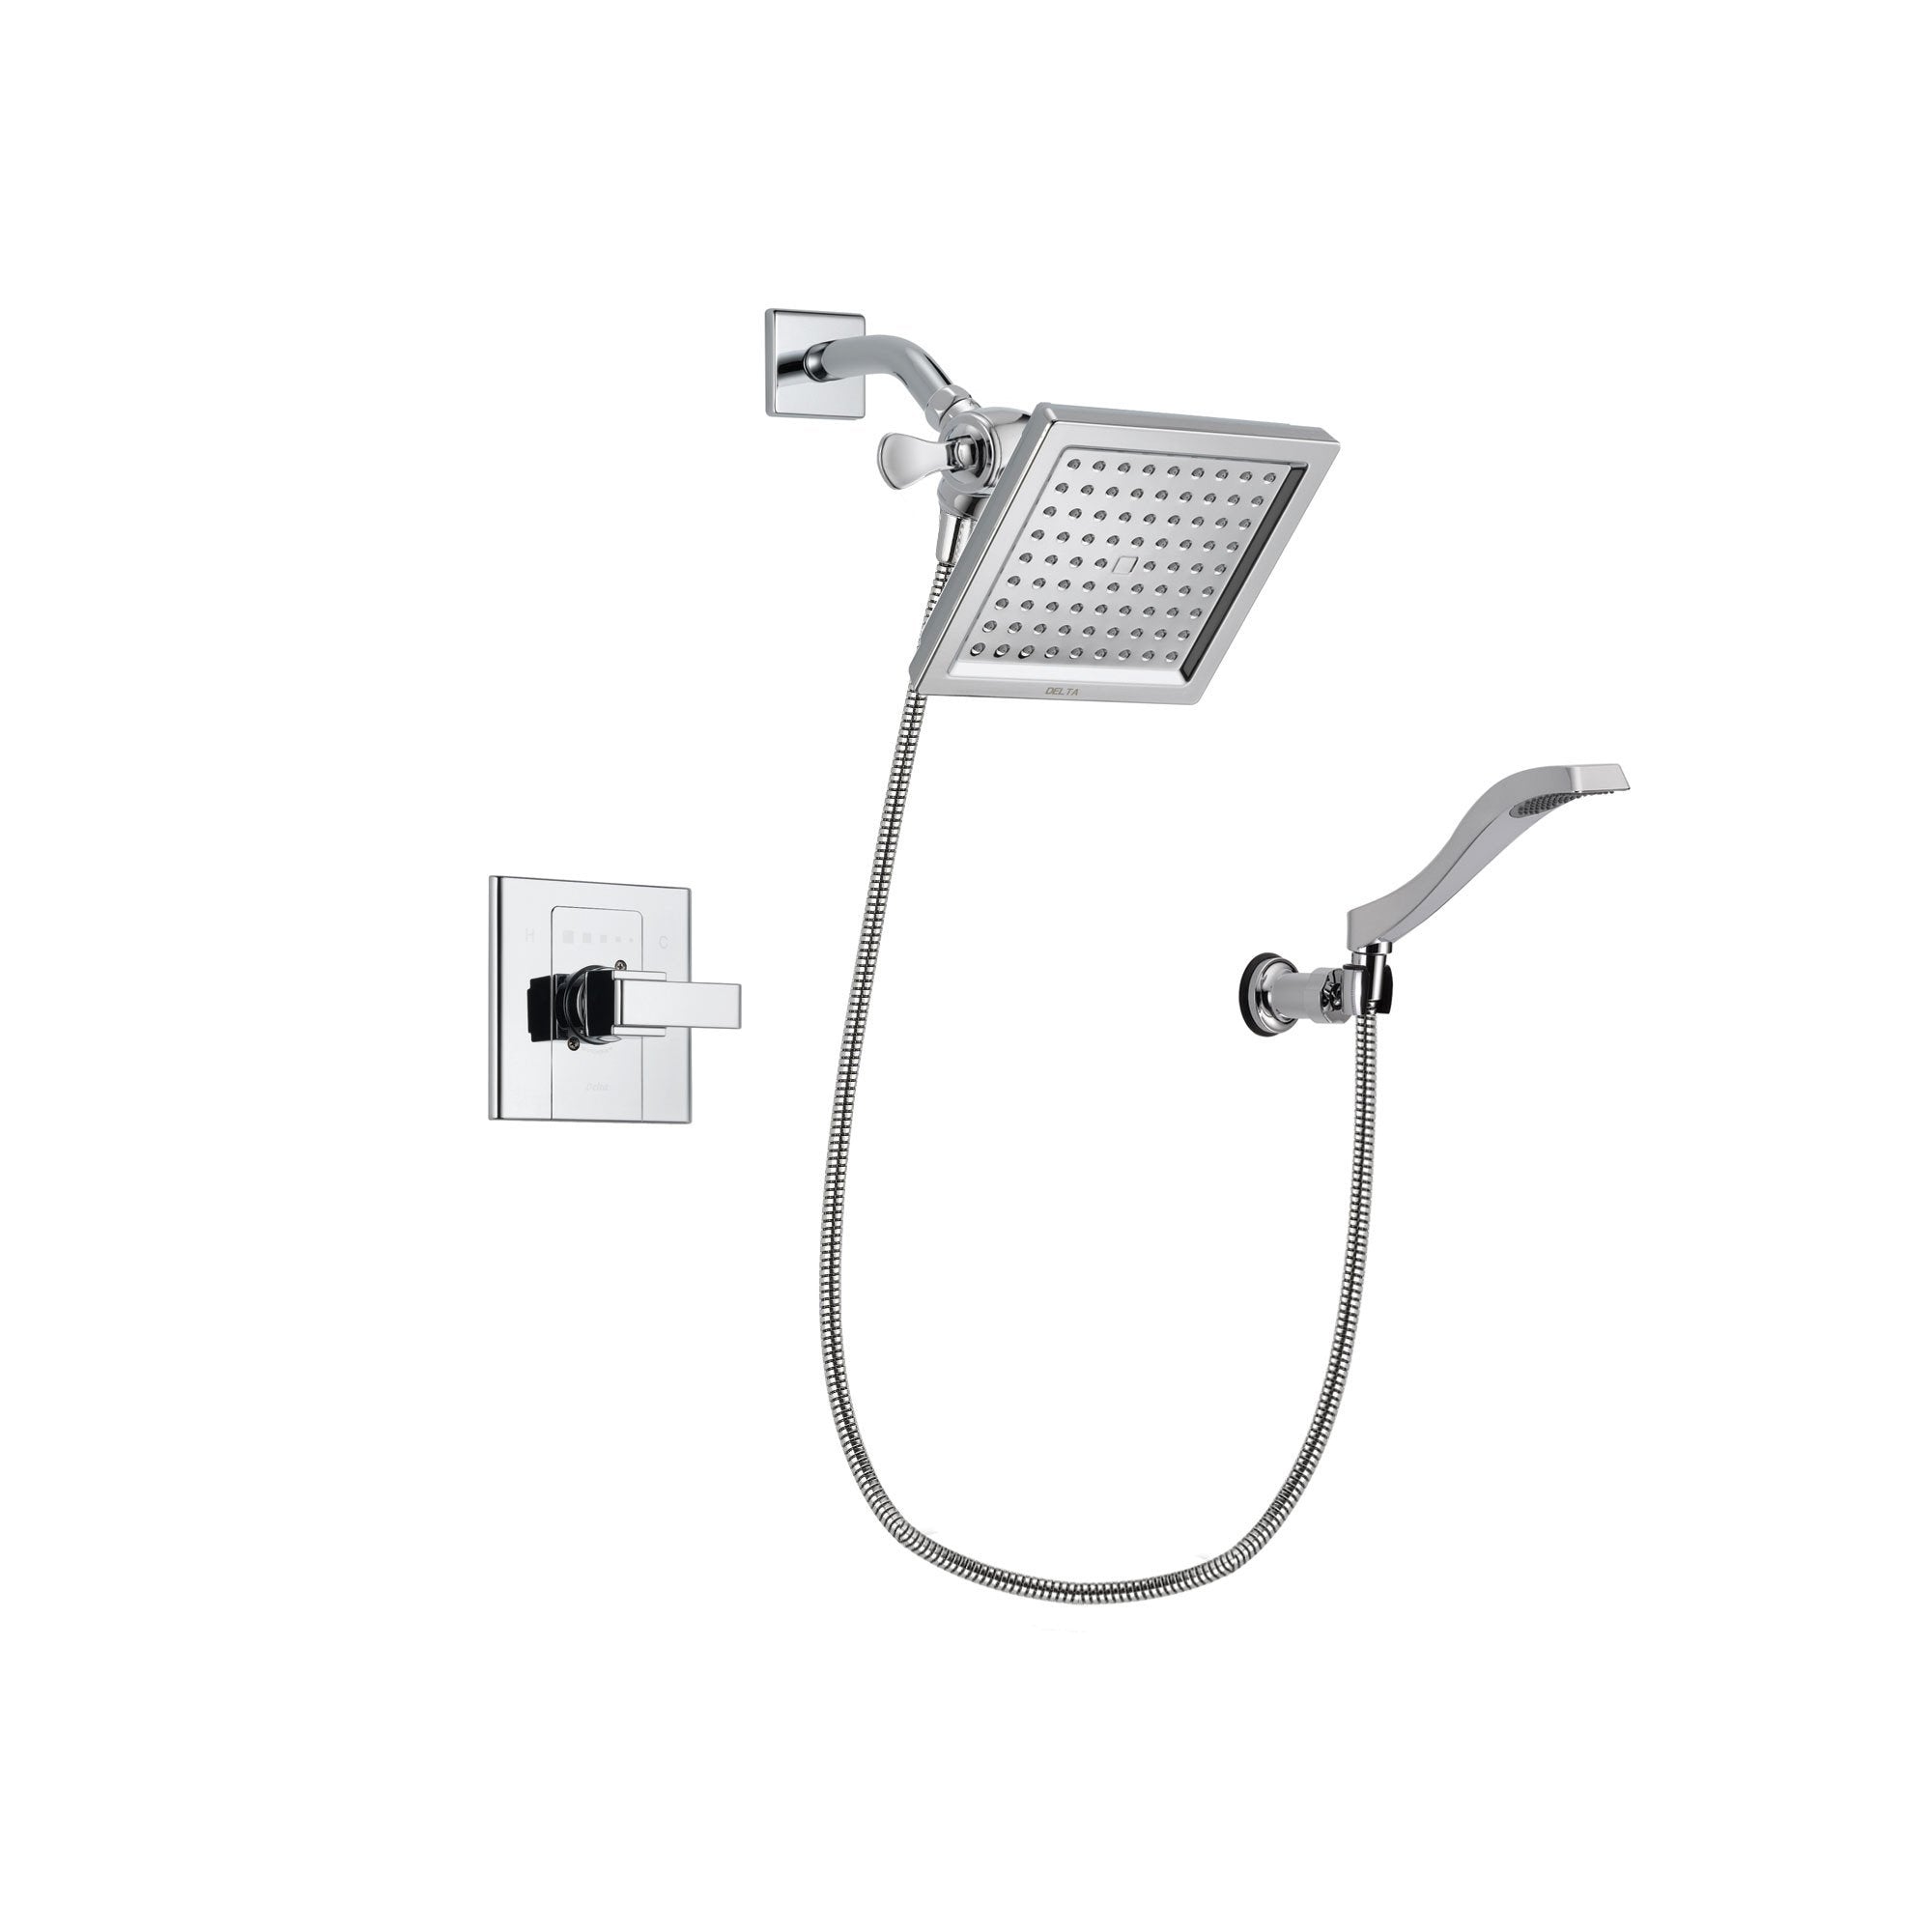 Delta Arzo Chrome Finish Shower Faucet System Package with 6.5-inch Square Rain Showerhead and Modern Handheld Shower Spray with Wall Bracket and Hose Includes Rough-in Valve DSP0028V